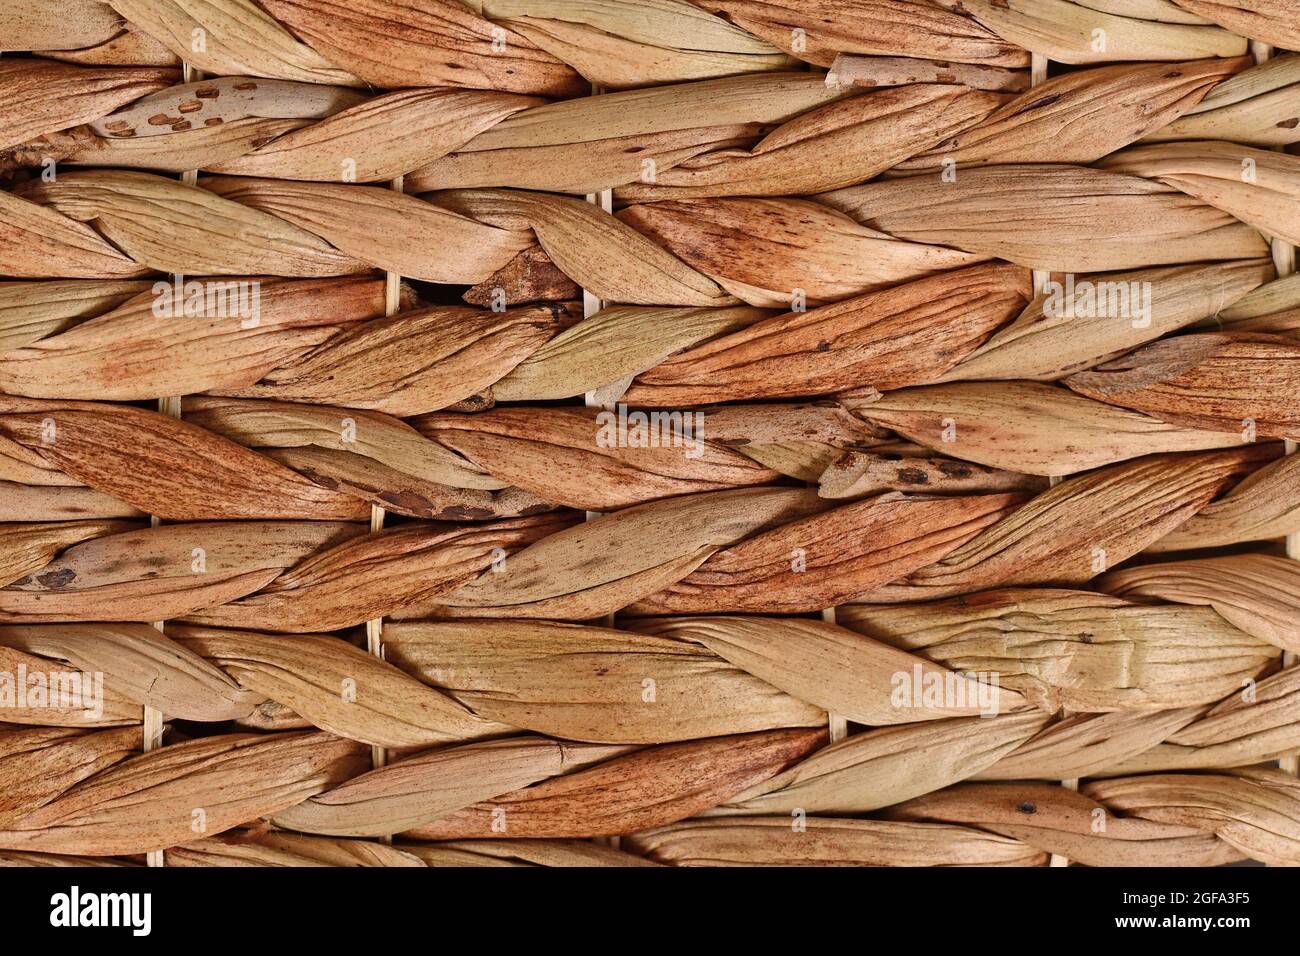 Close up of wicker basket made from natural material Stock Photo